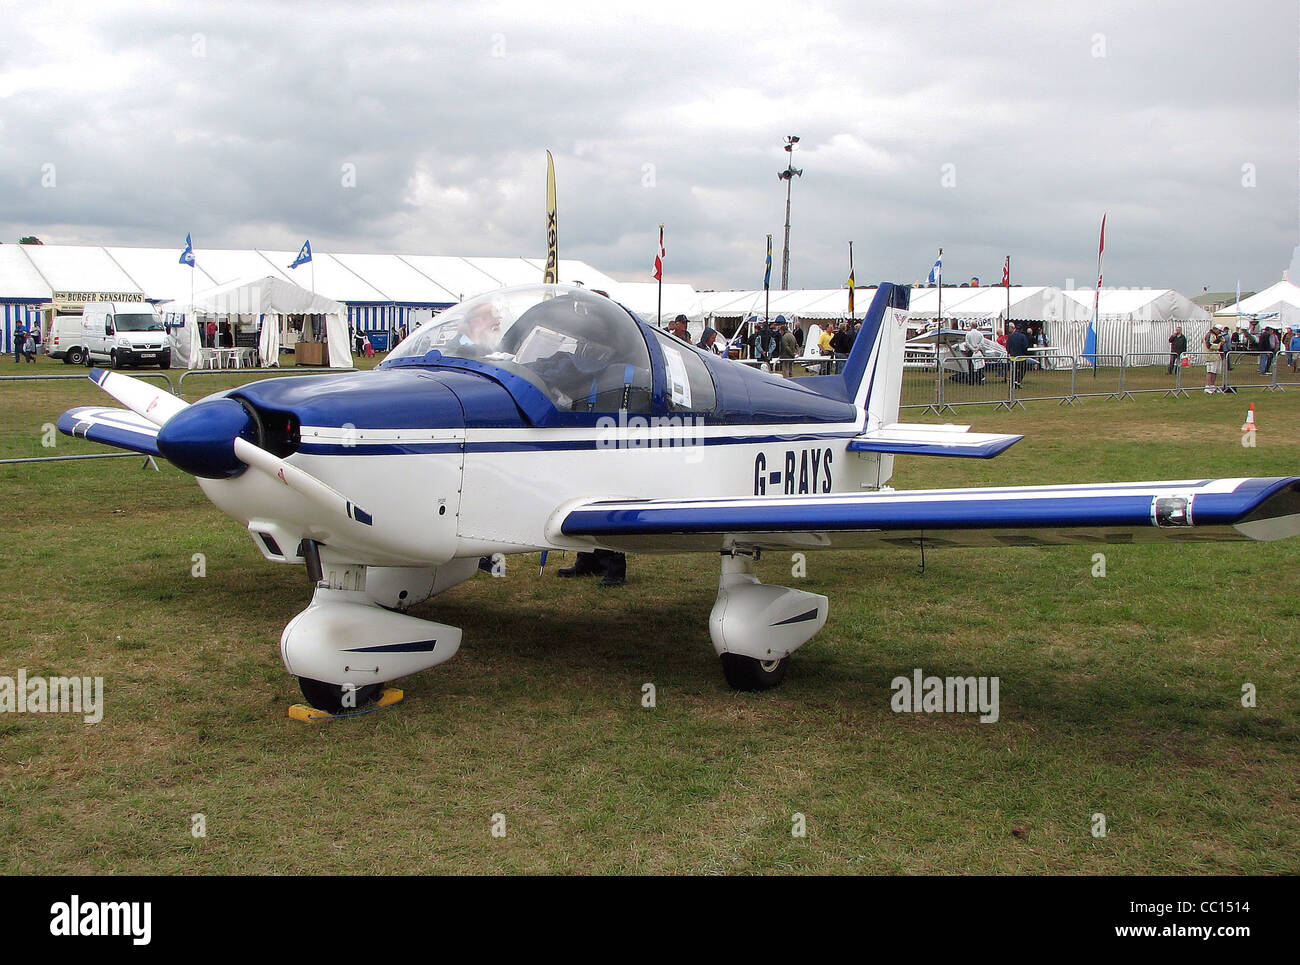 Zenair CH250 Zenith (G-RAYS) at a Popular Flying Association Rally at Kemble Airport, Gloucestershire, England. Stock Photo